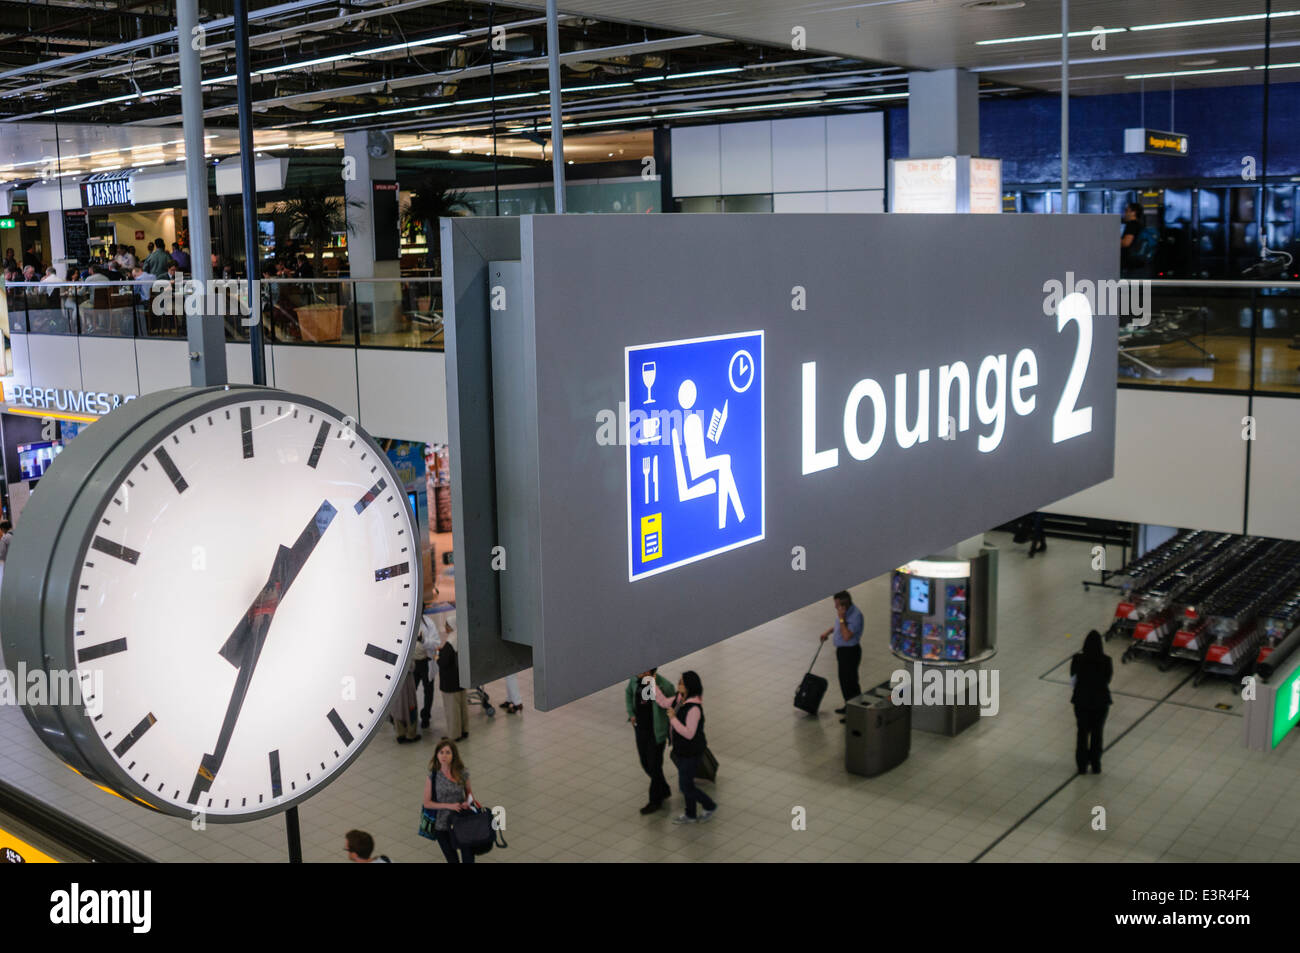 Abflughalle 2, Schiphol Airport Stockfoto